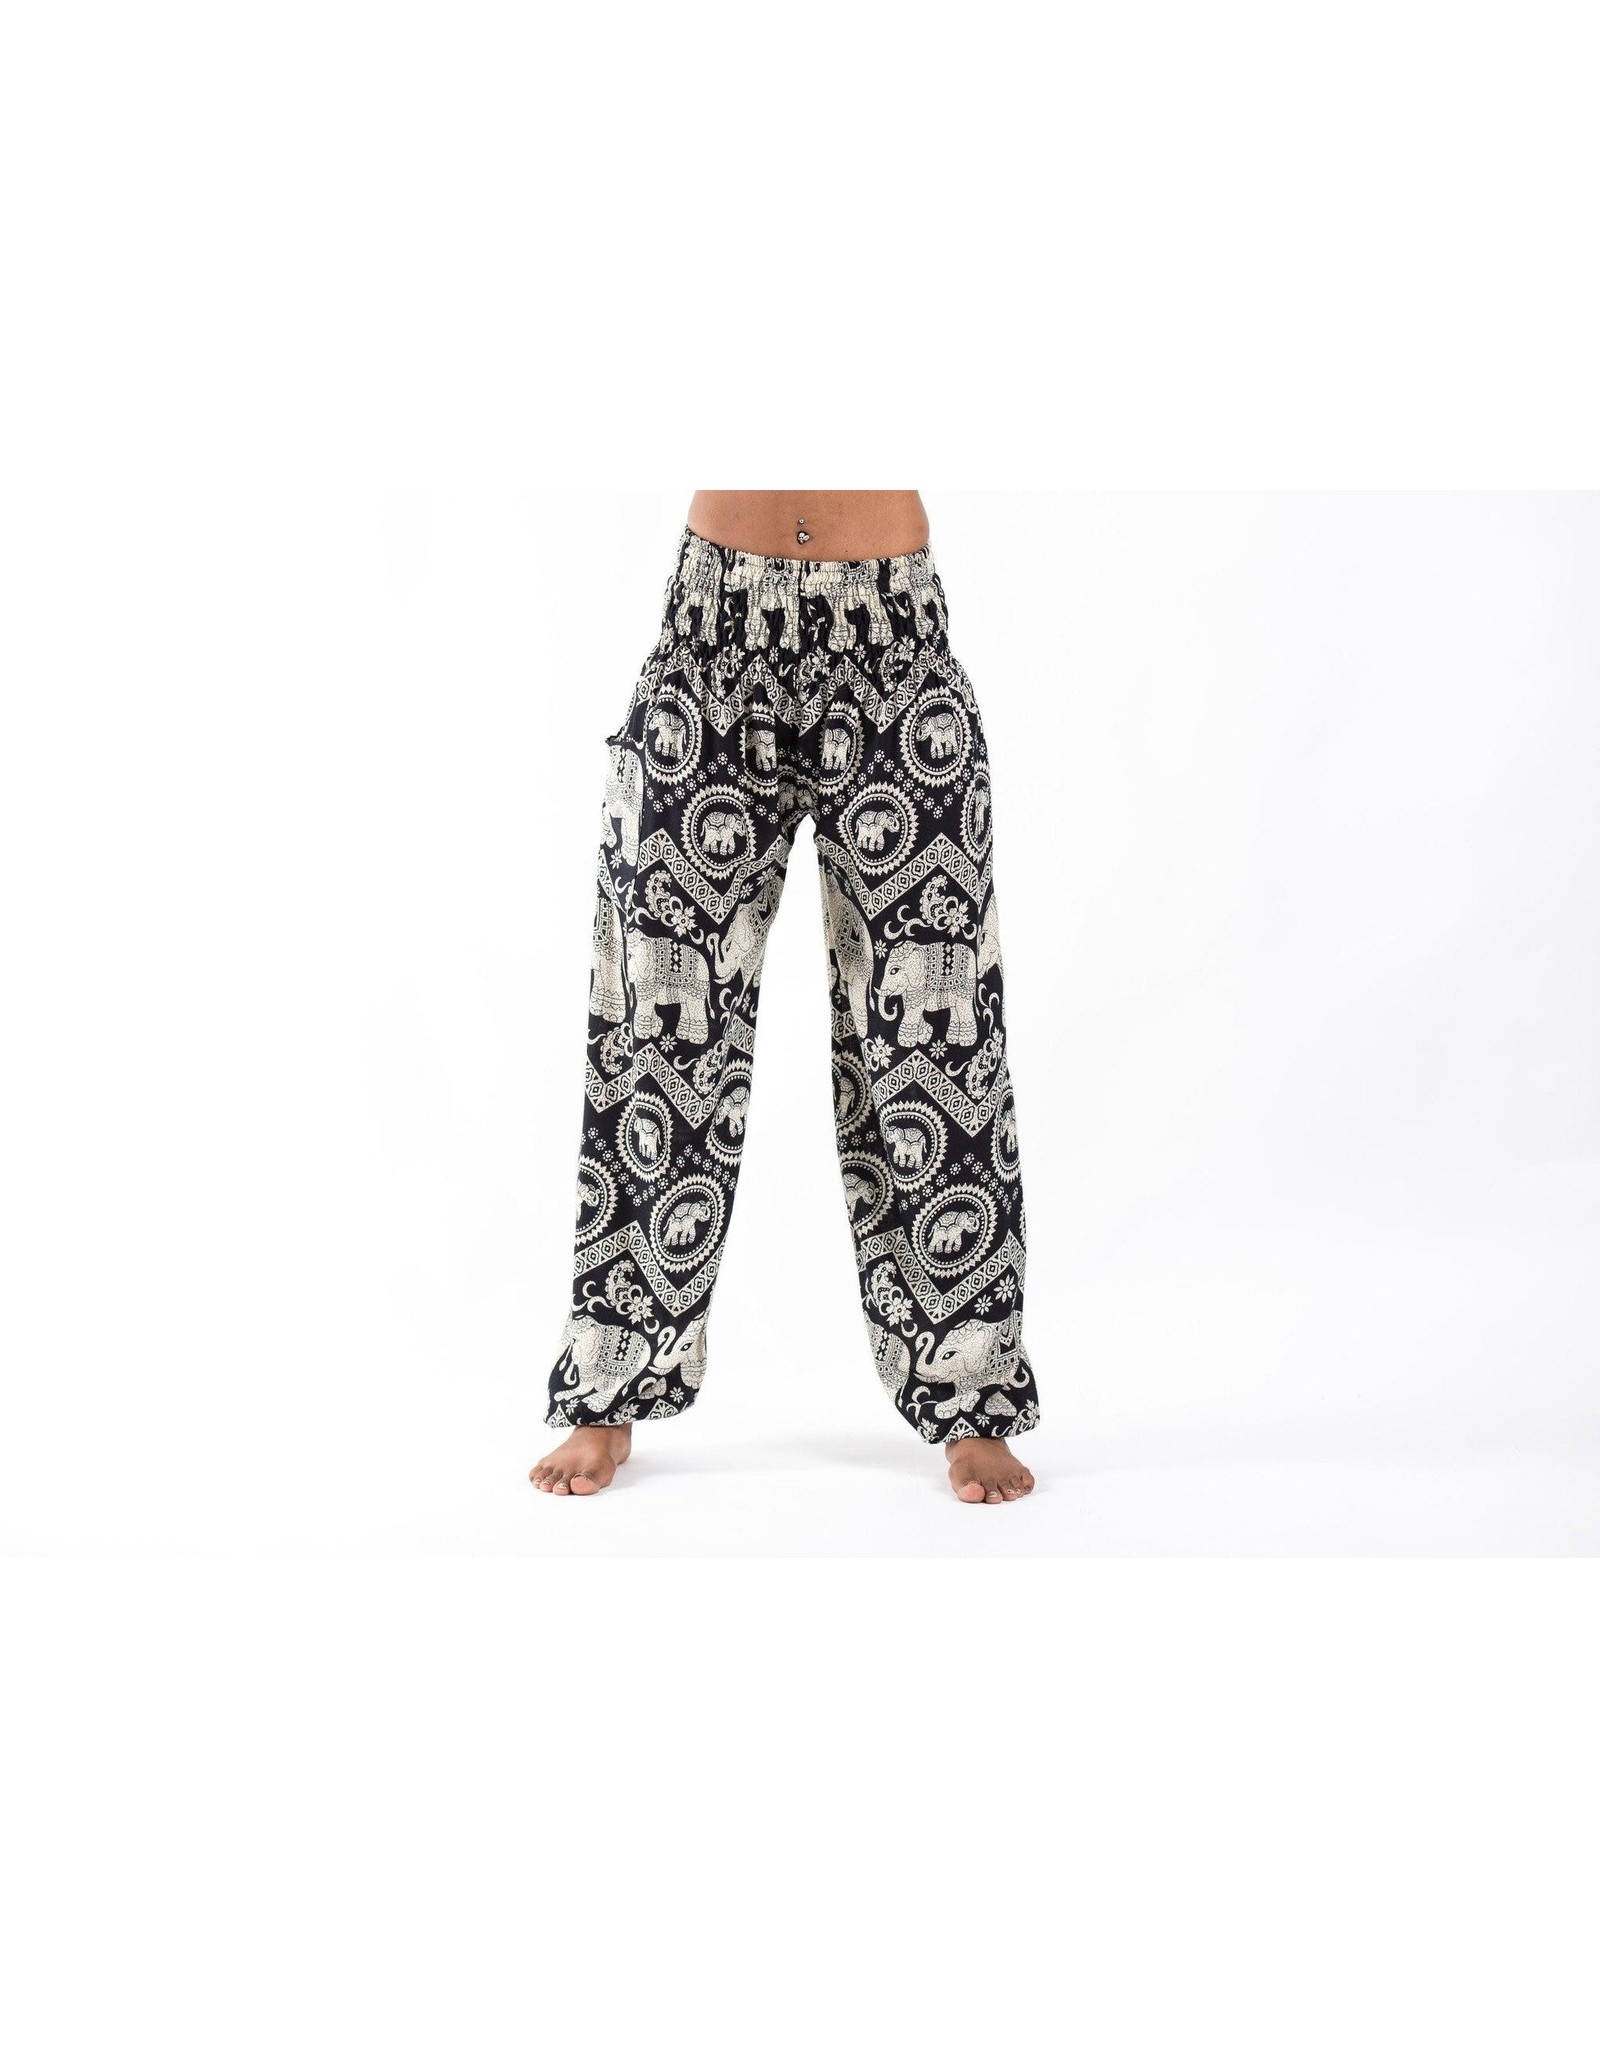 Trade roots Elephant Pants, Imperial Black, O/S, Thailand